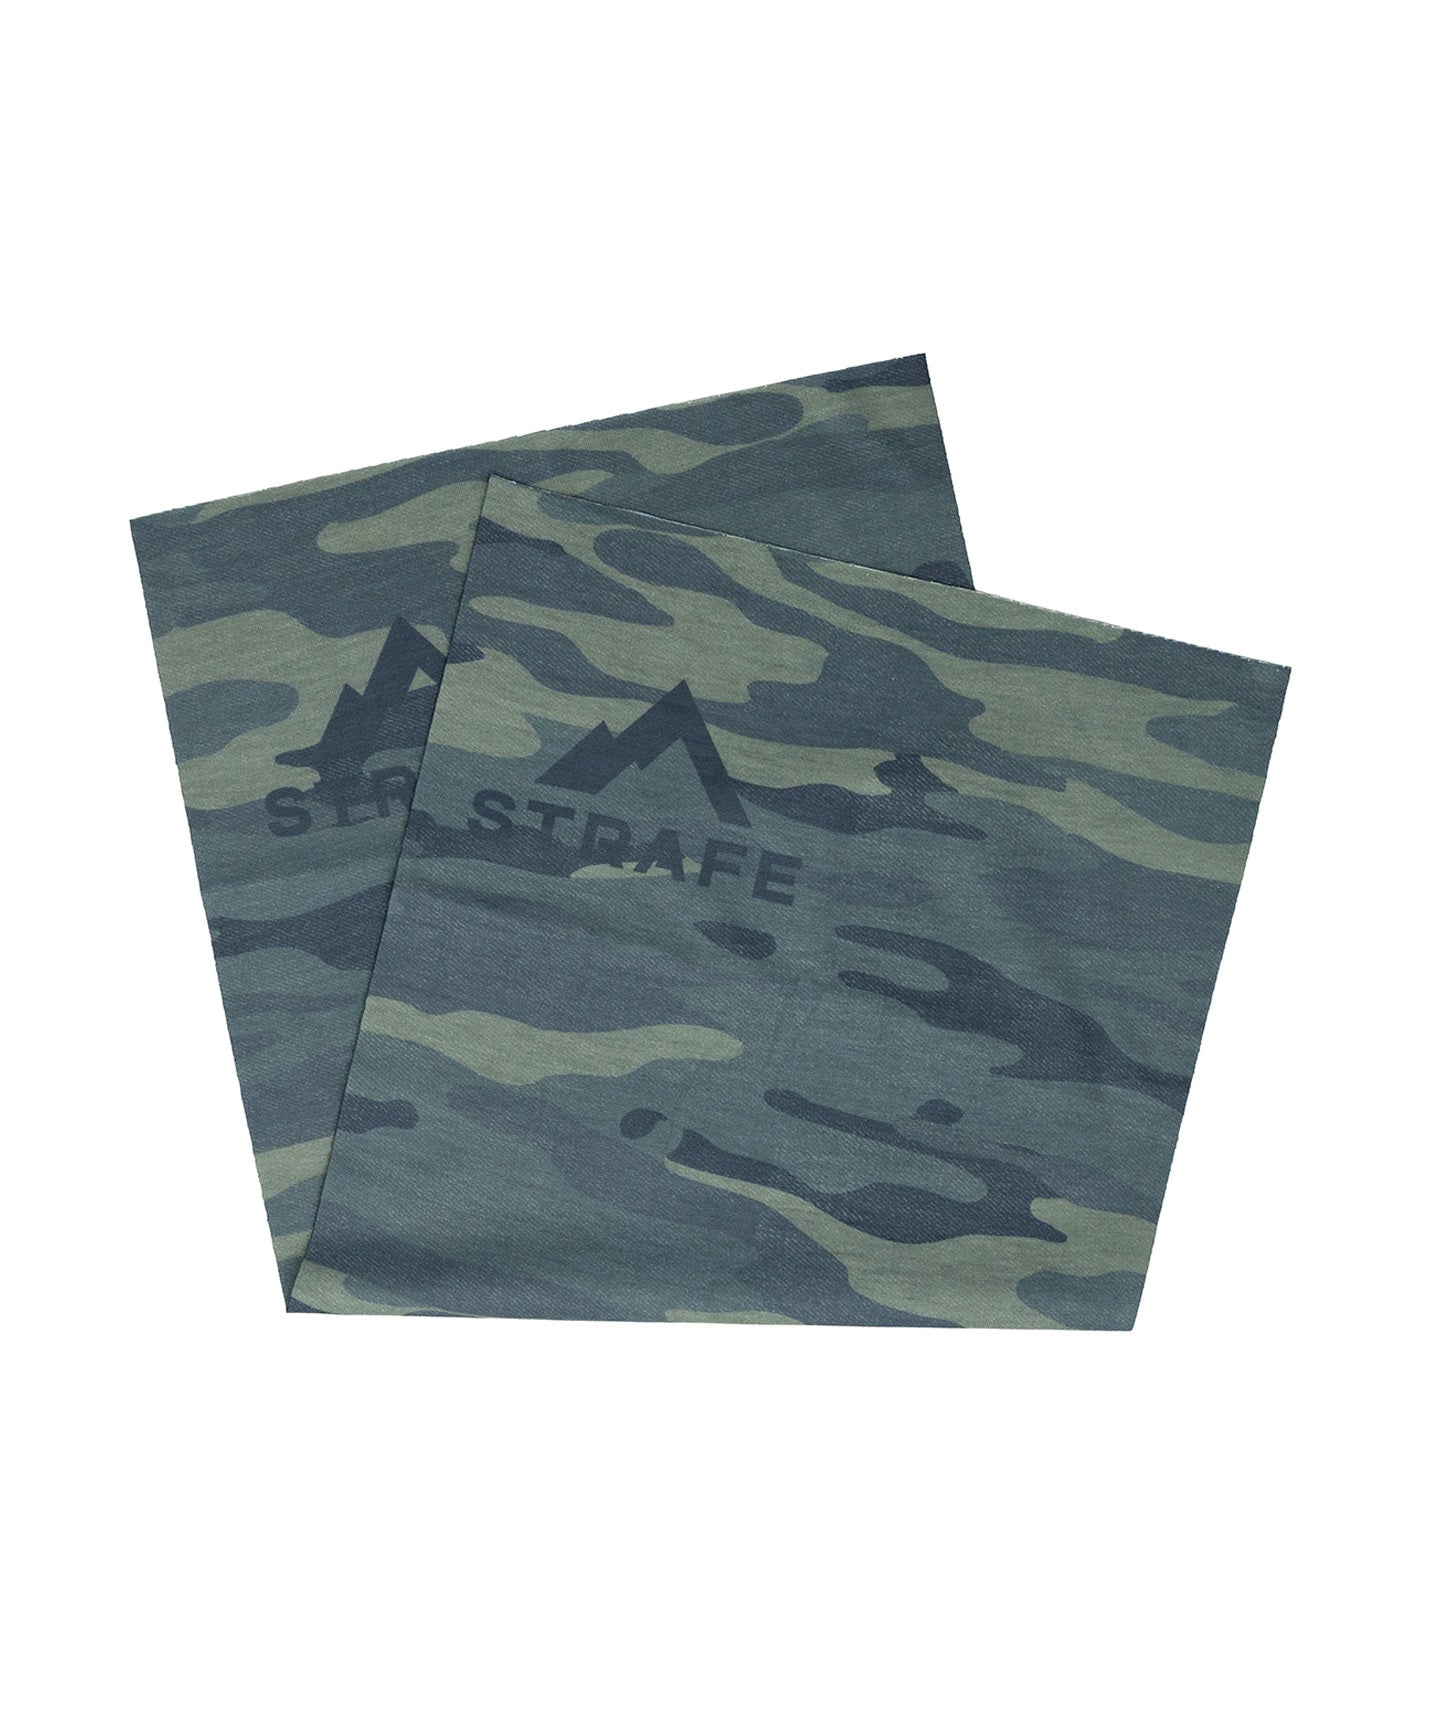 strafe outerwear fall/winter 23/24 collection strafe facemask in arctic blue icons 